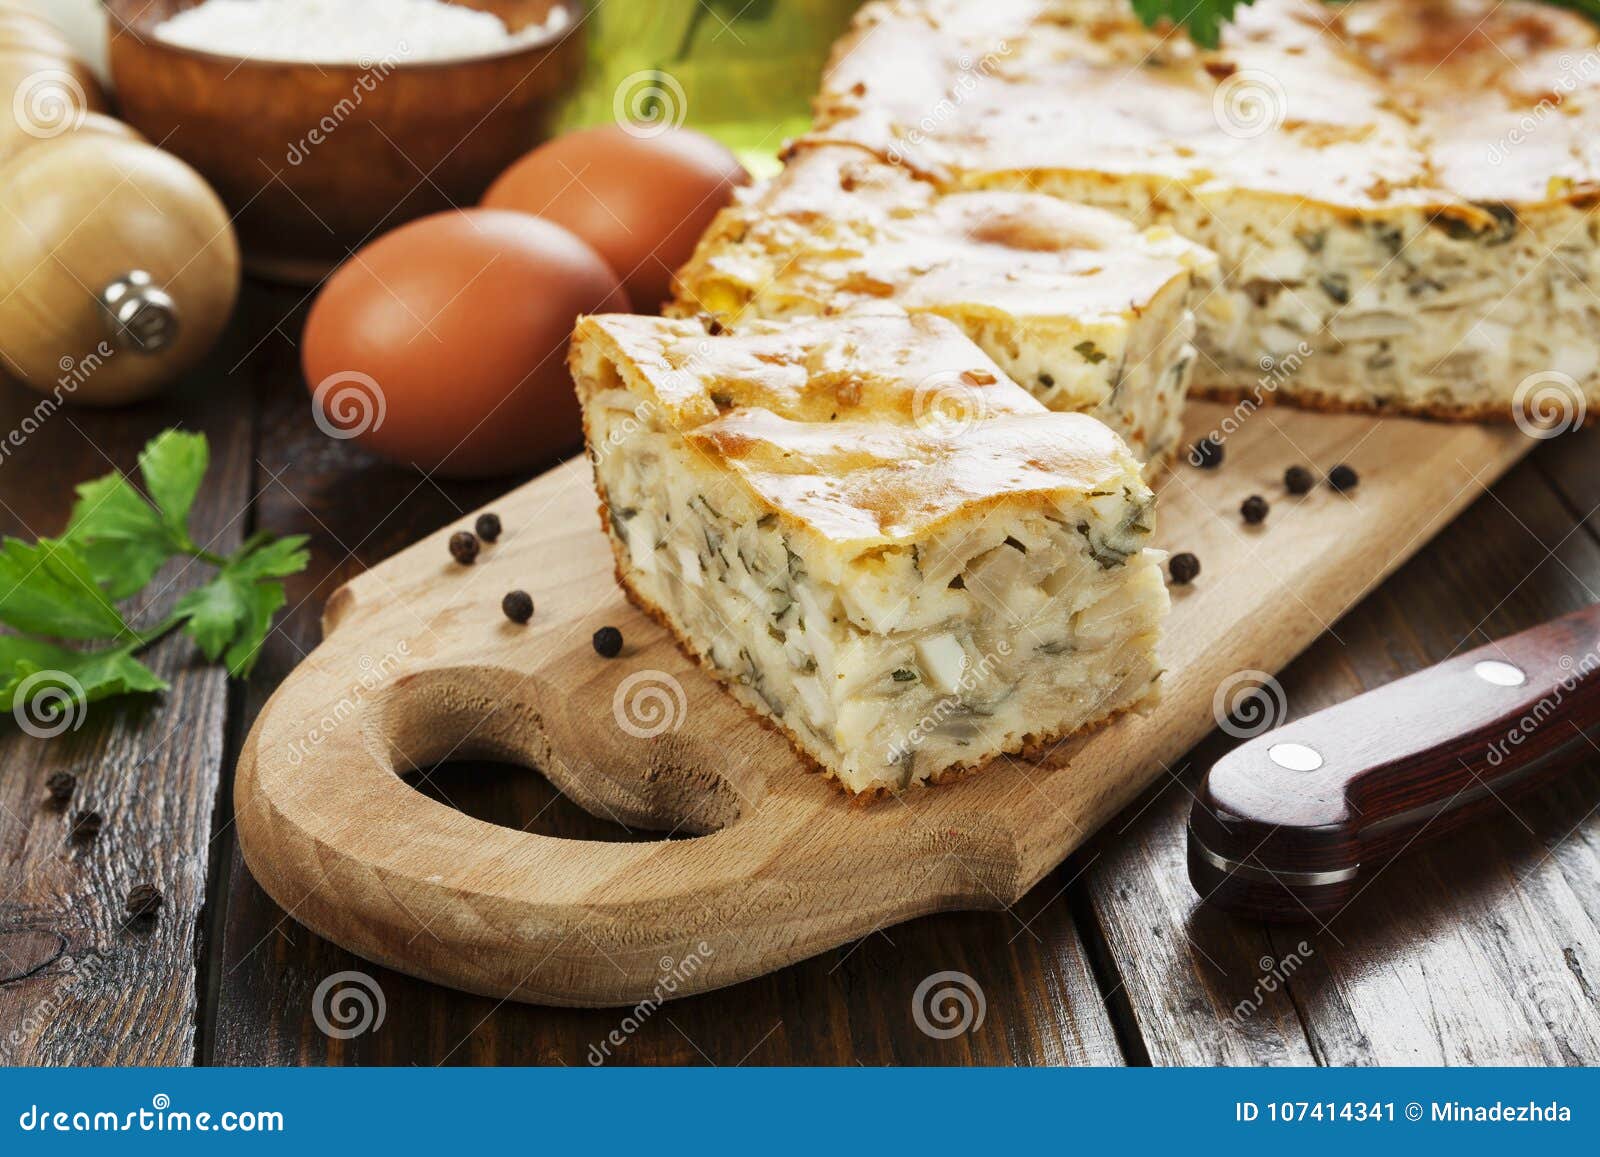 Pie with cabbage and eggs stock image. Image of traditional - 107414341